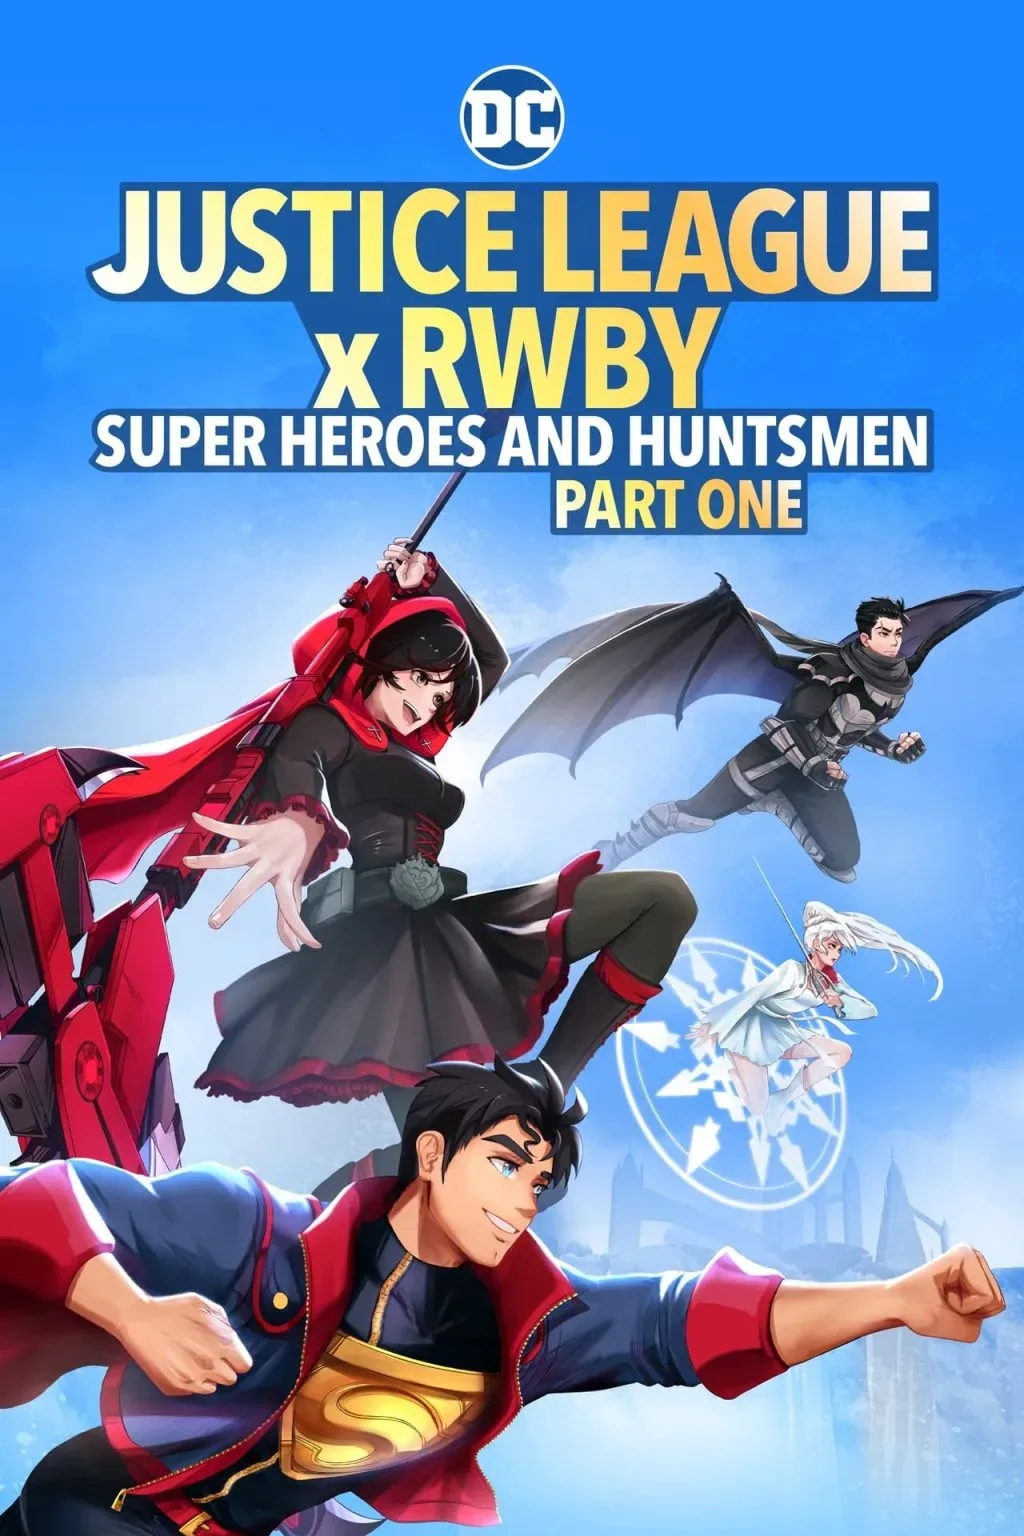 In the movie Justice League x RWBY: Super Heroes & Huntsmen, Part One - Members of the Justice League are transported to the world of Remnant and find themselves turned into teenagers. The Remnant heroes combine forces with the Justice League to uncover why their planet has been mysteriously altered.